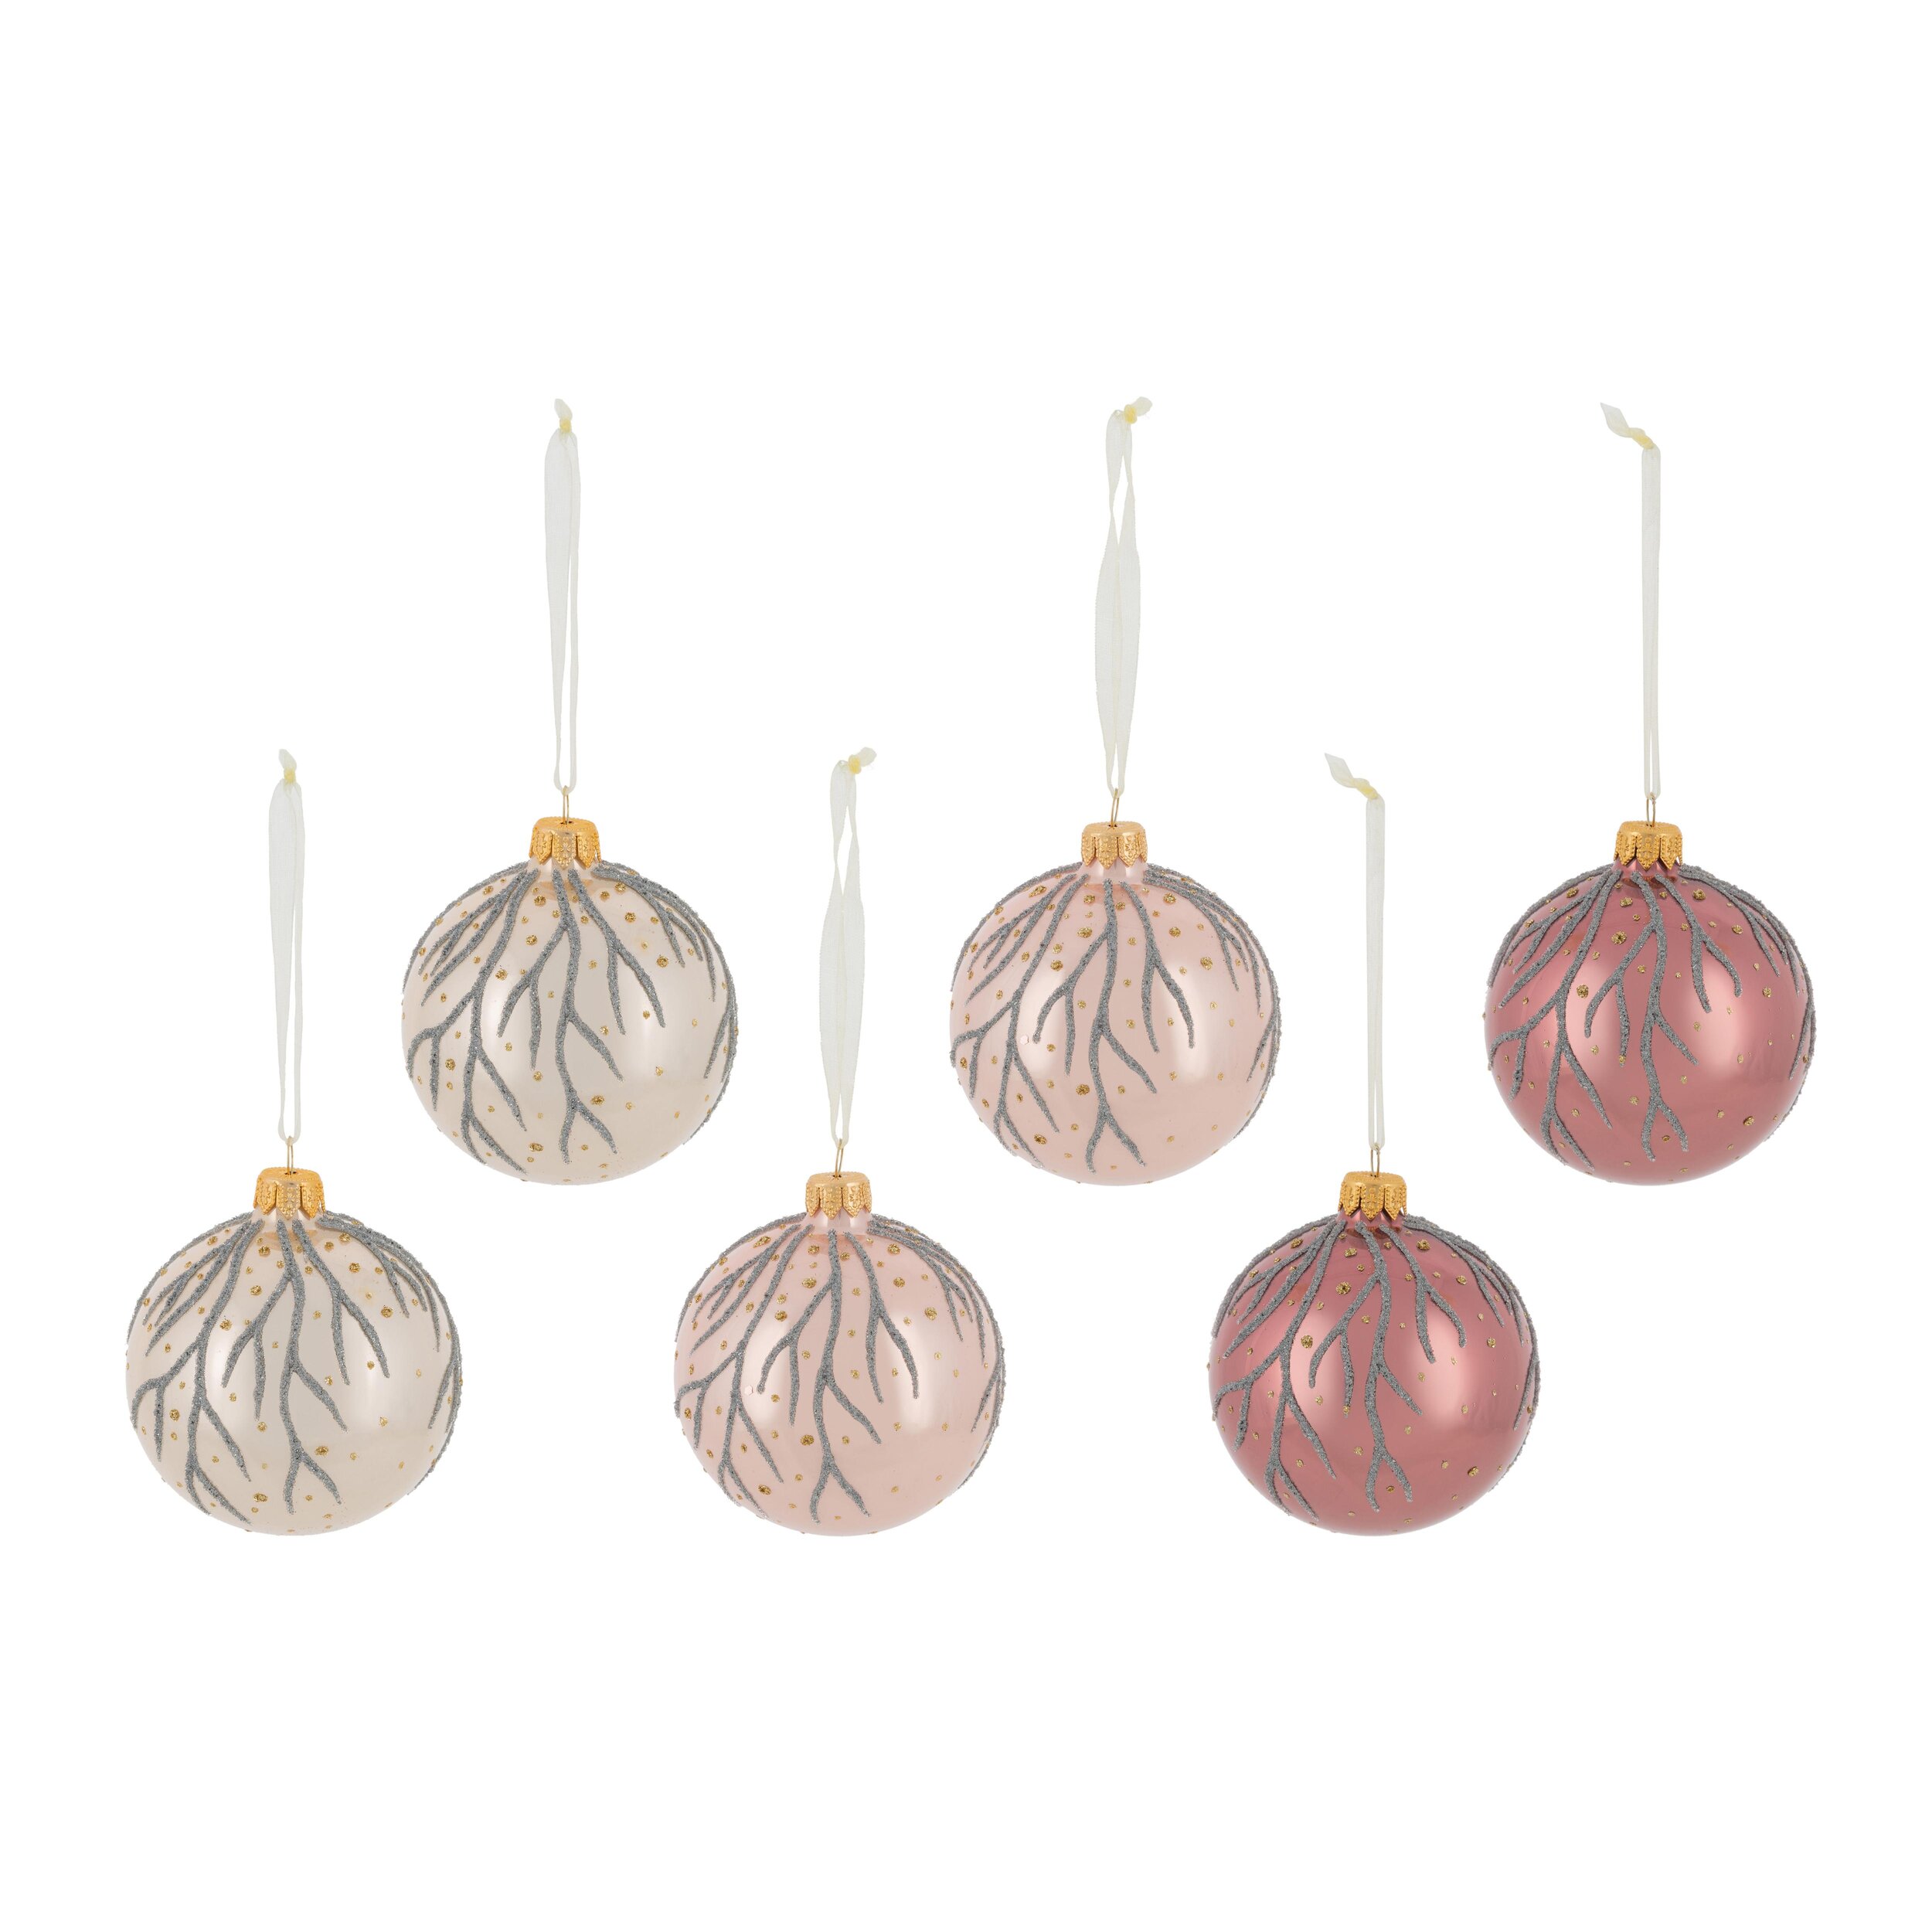 Baubles, £35 for six, A by Amara